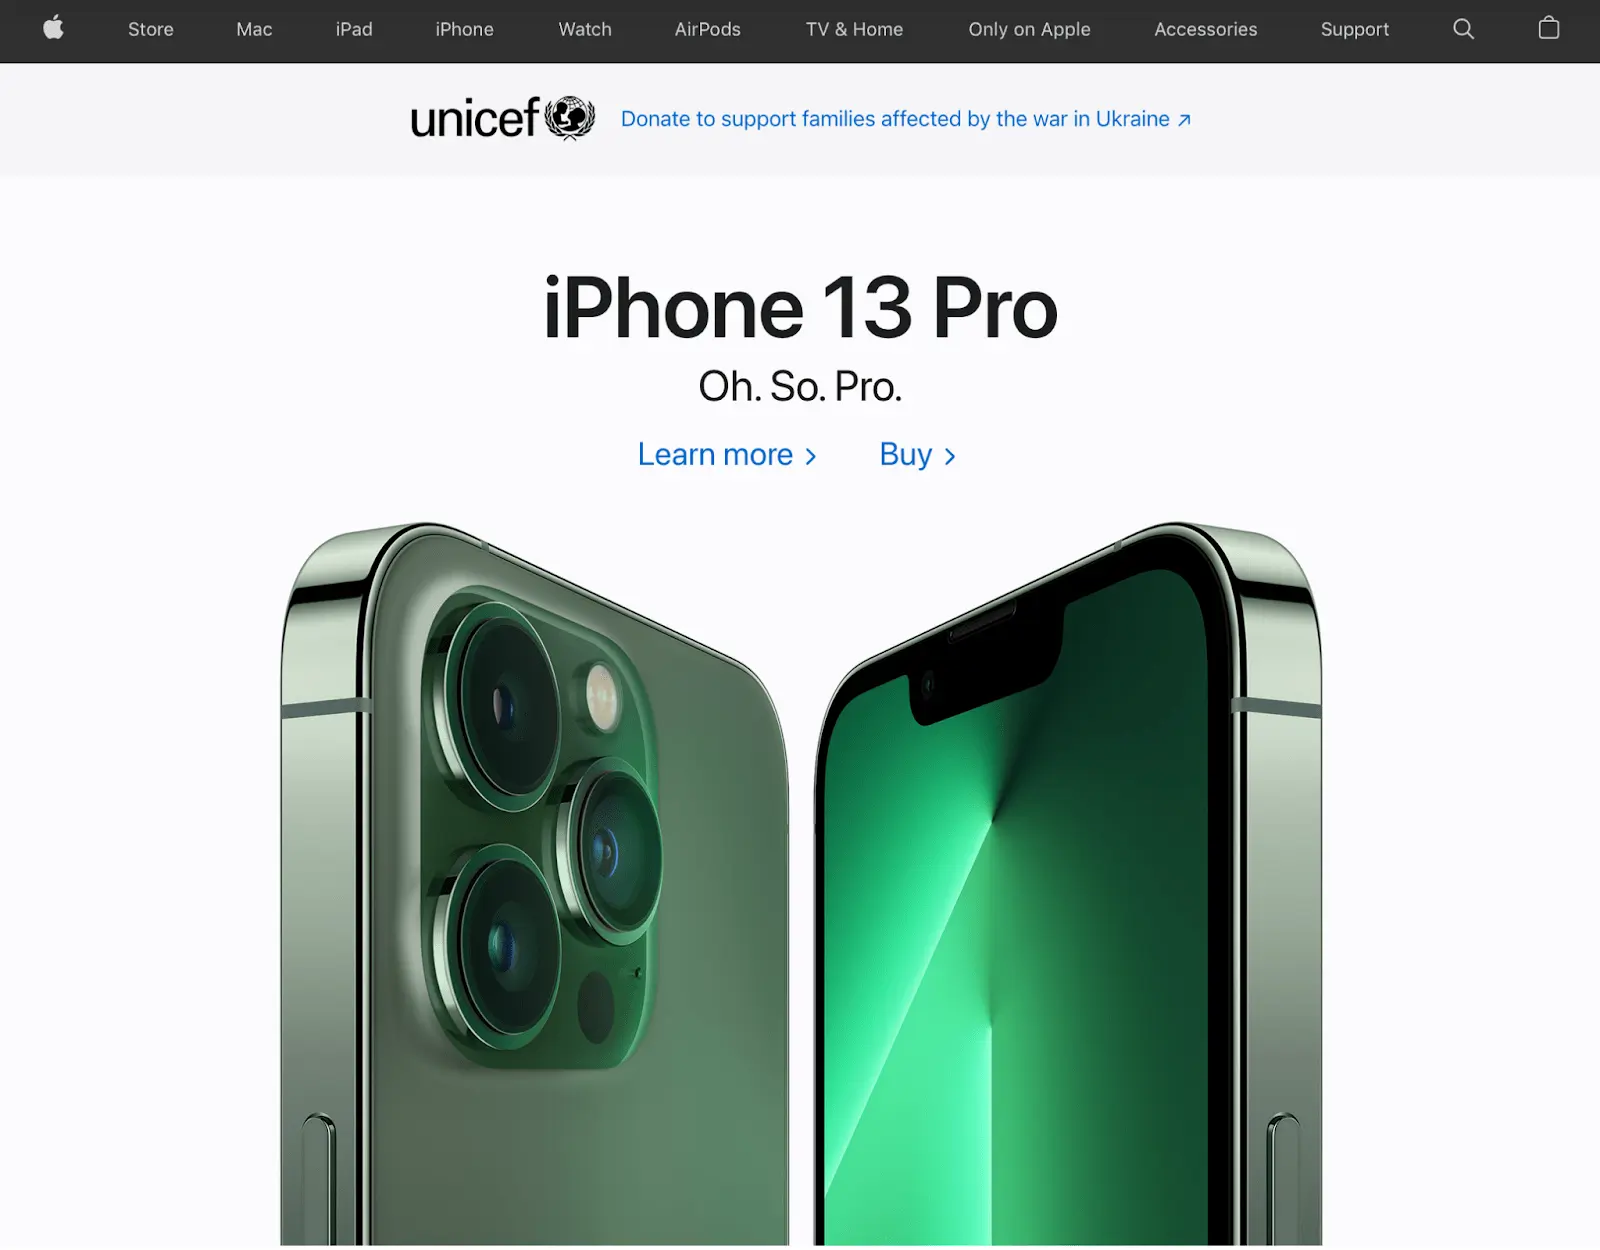 The Apple website homepage, showing Flat Design style.